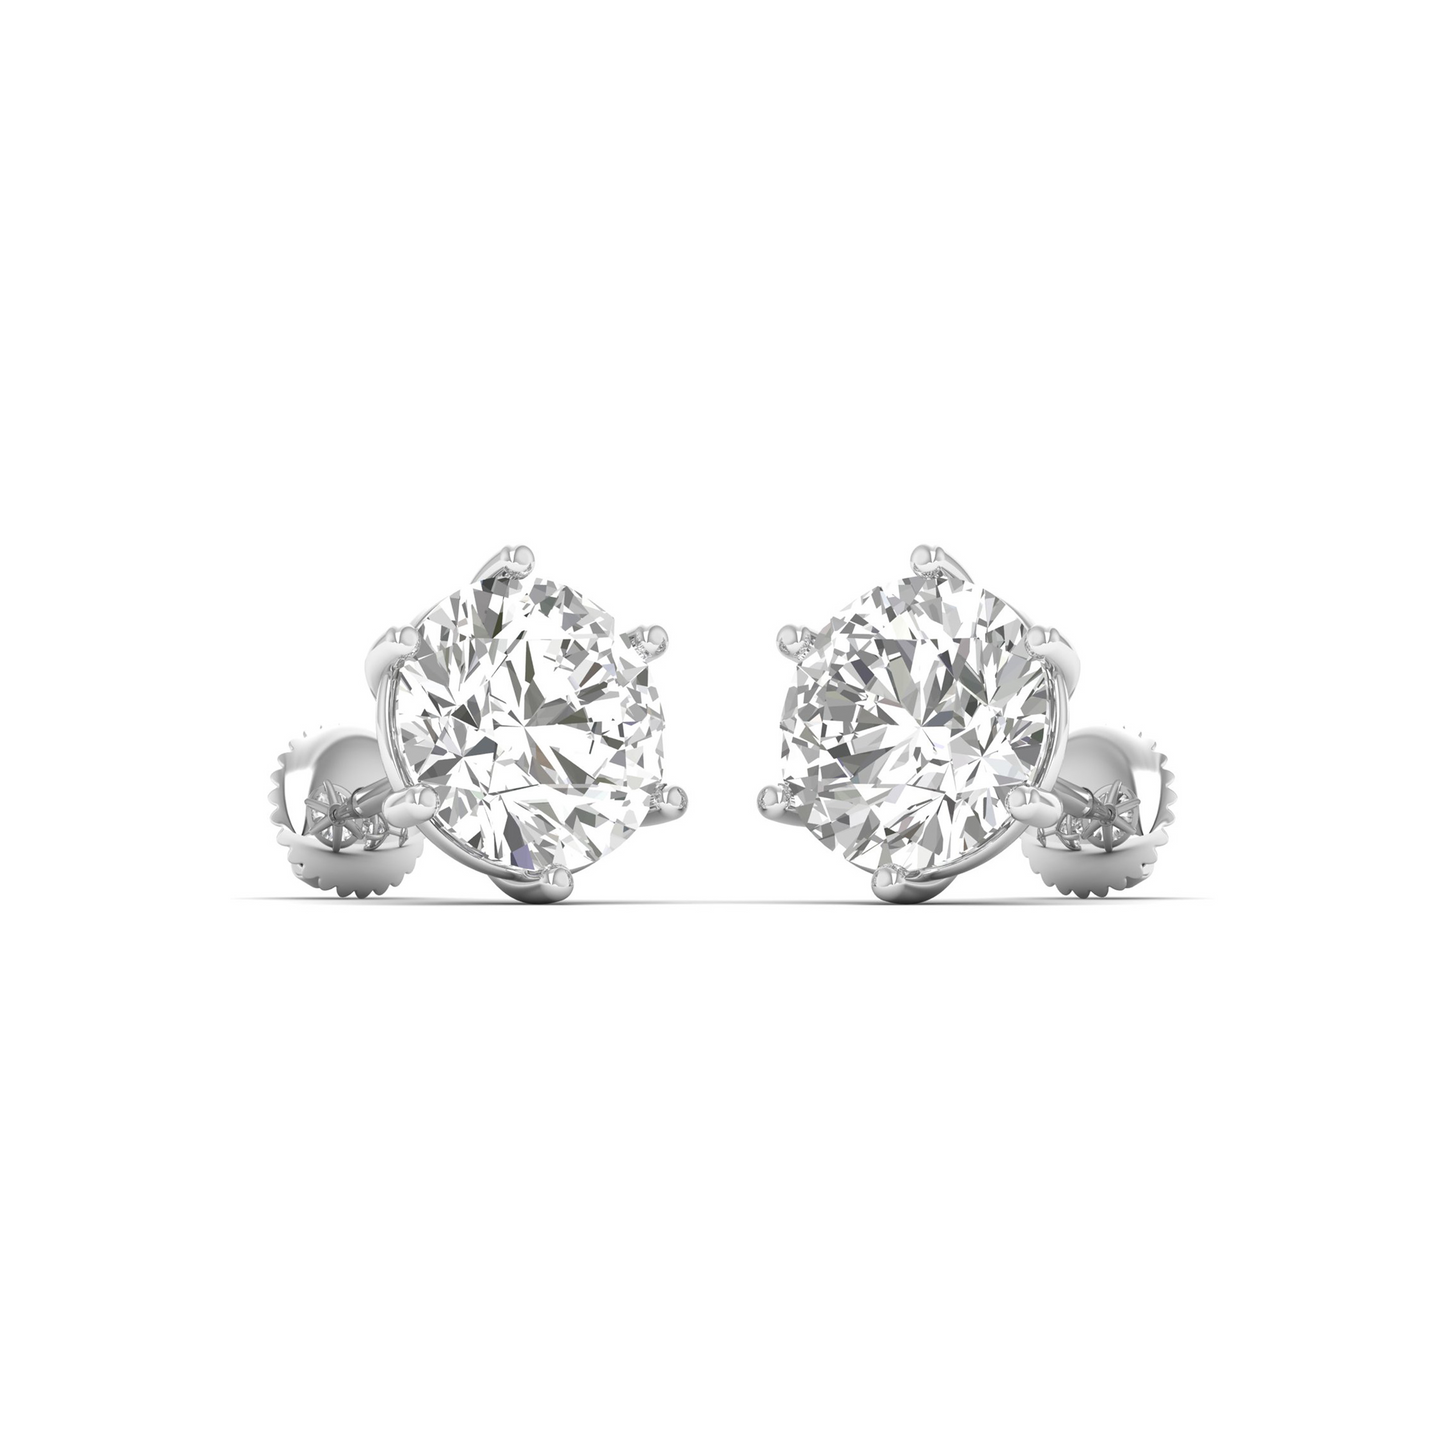 Radiant Rounds: Elevate Your Style with Exquisite Round-Cut Diamond Earrings